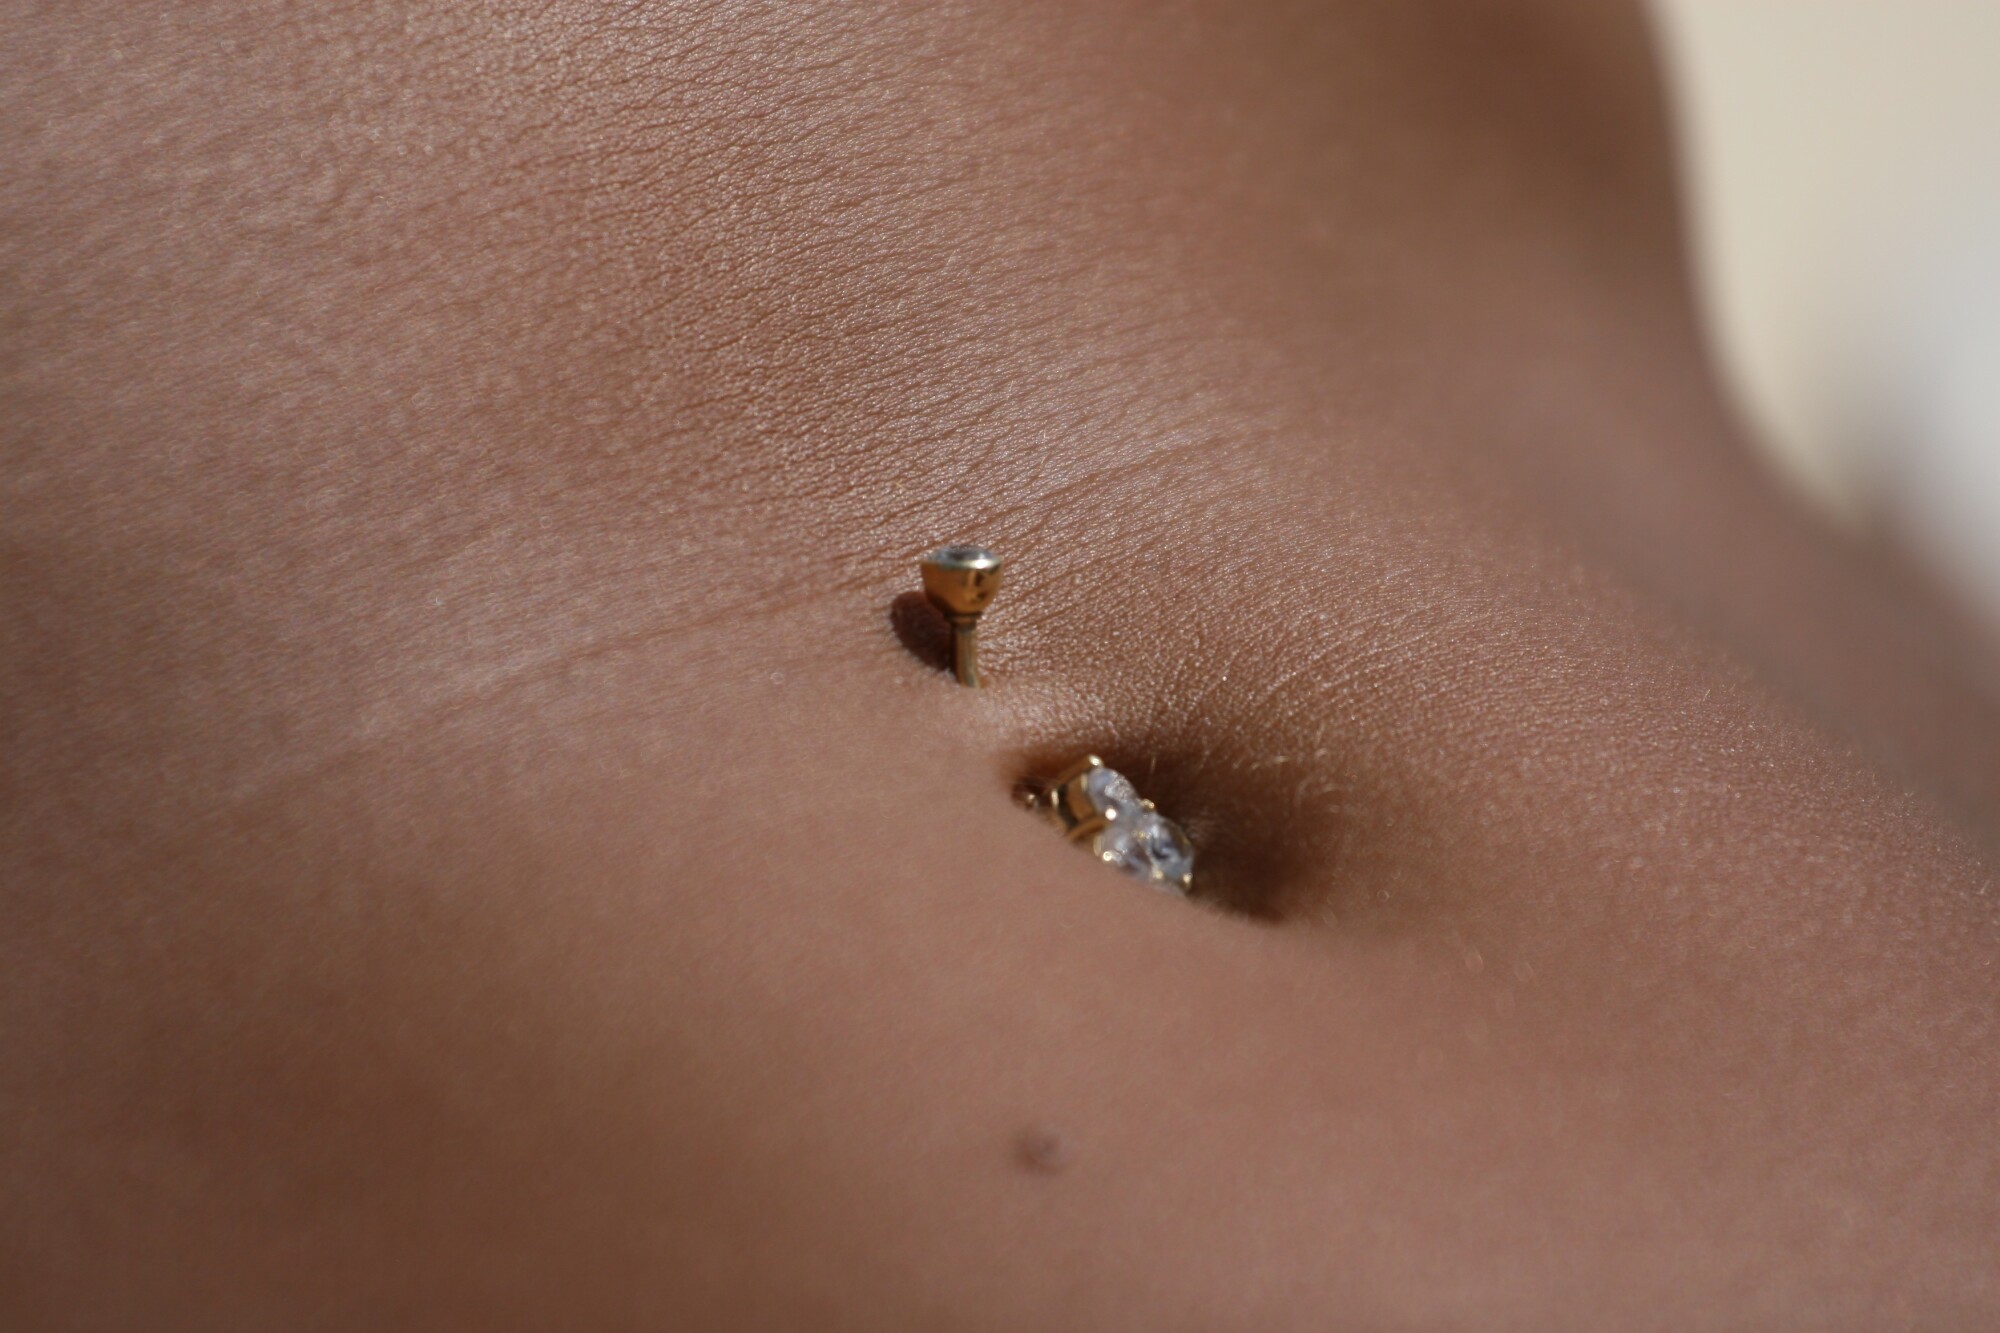 Body Piercing Guide—What To Expect, Healing, and Care